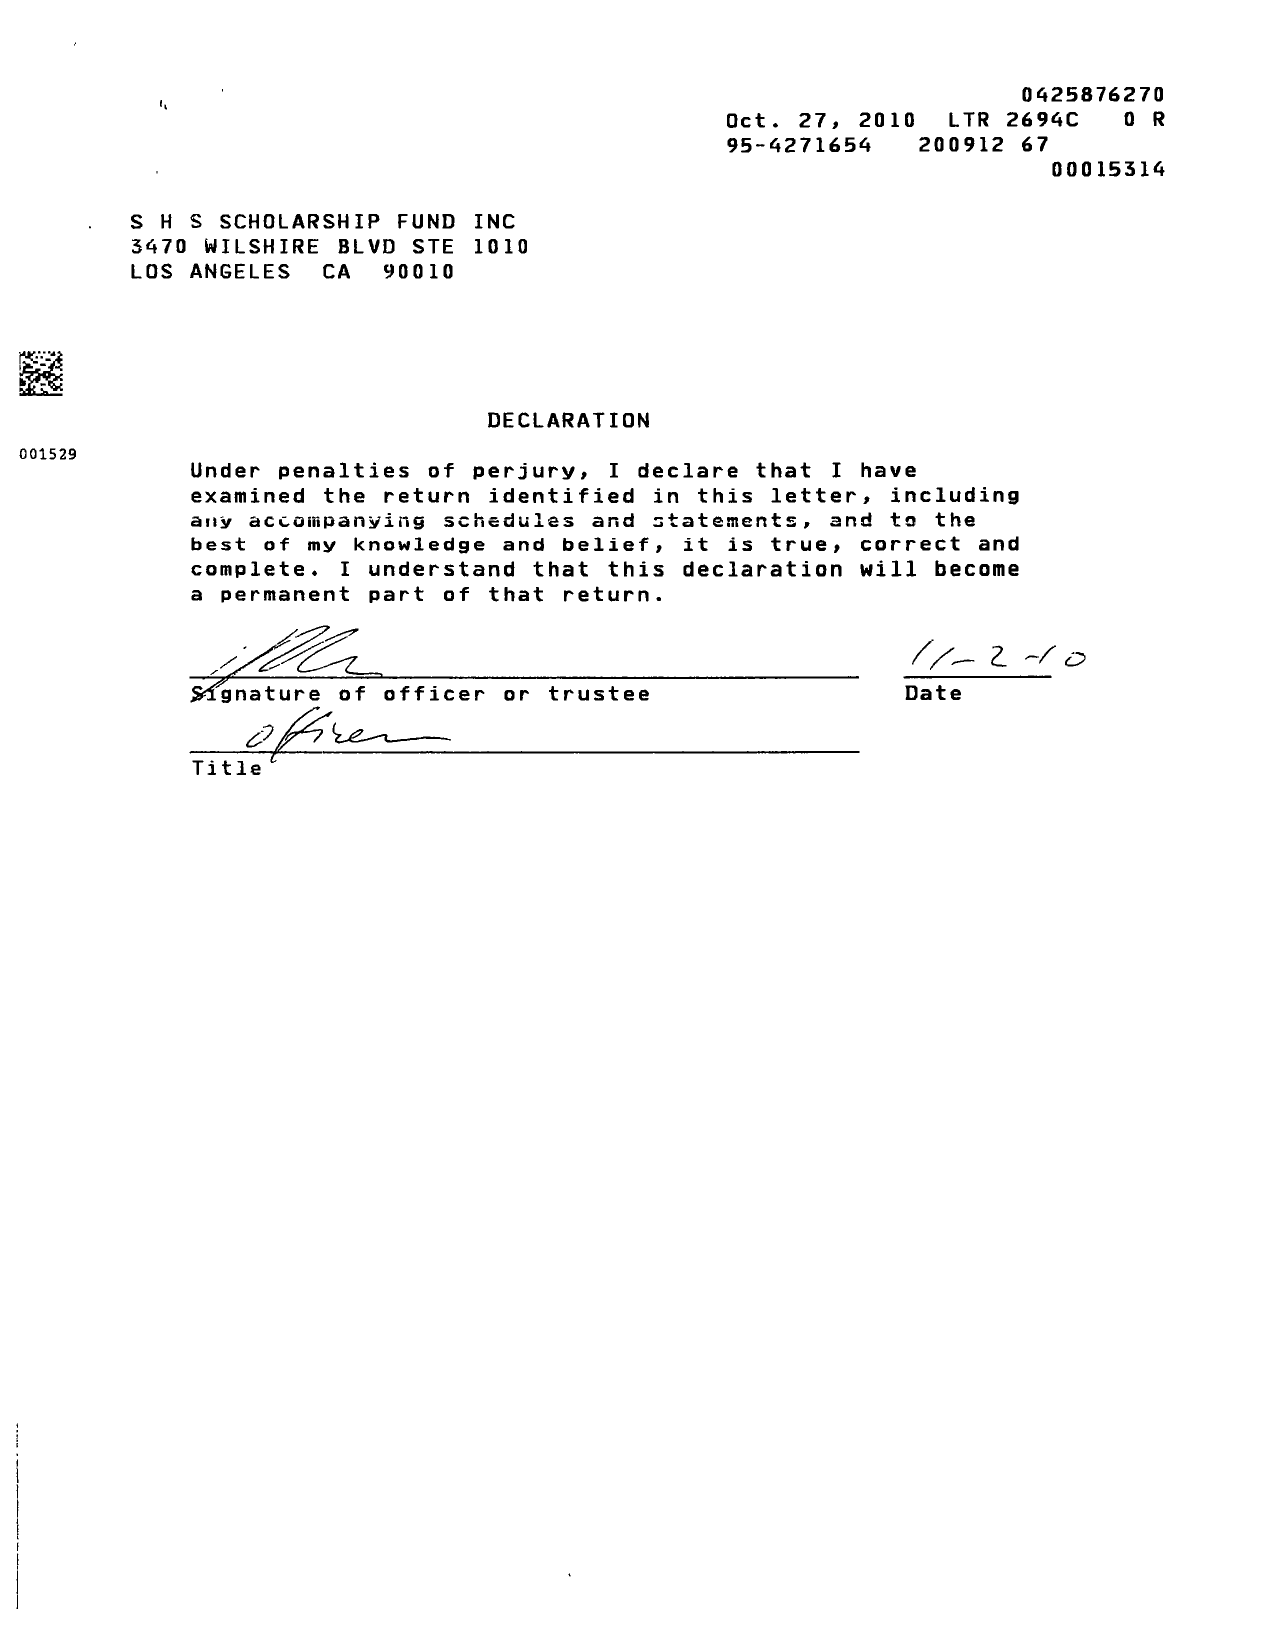 Image of first page of 2009 Form 990R for S H S Scholarship Fund